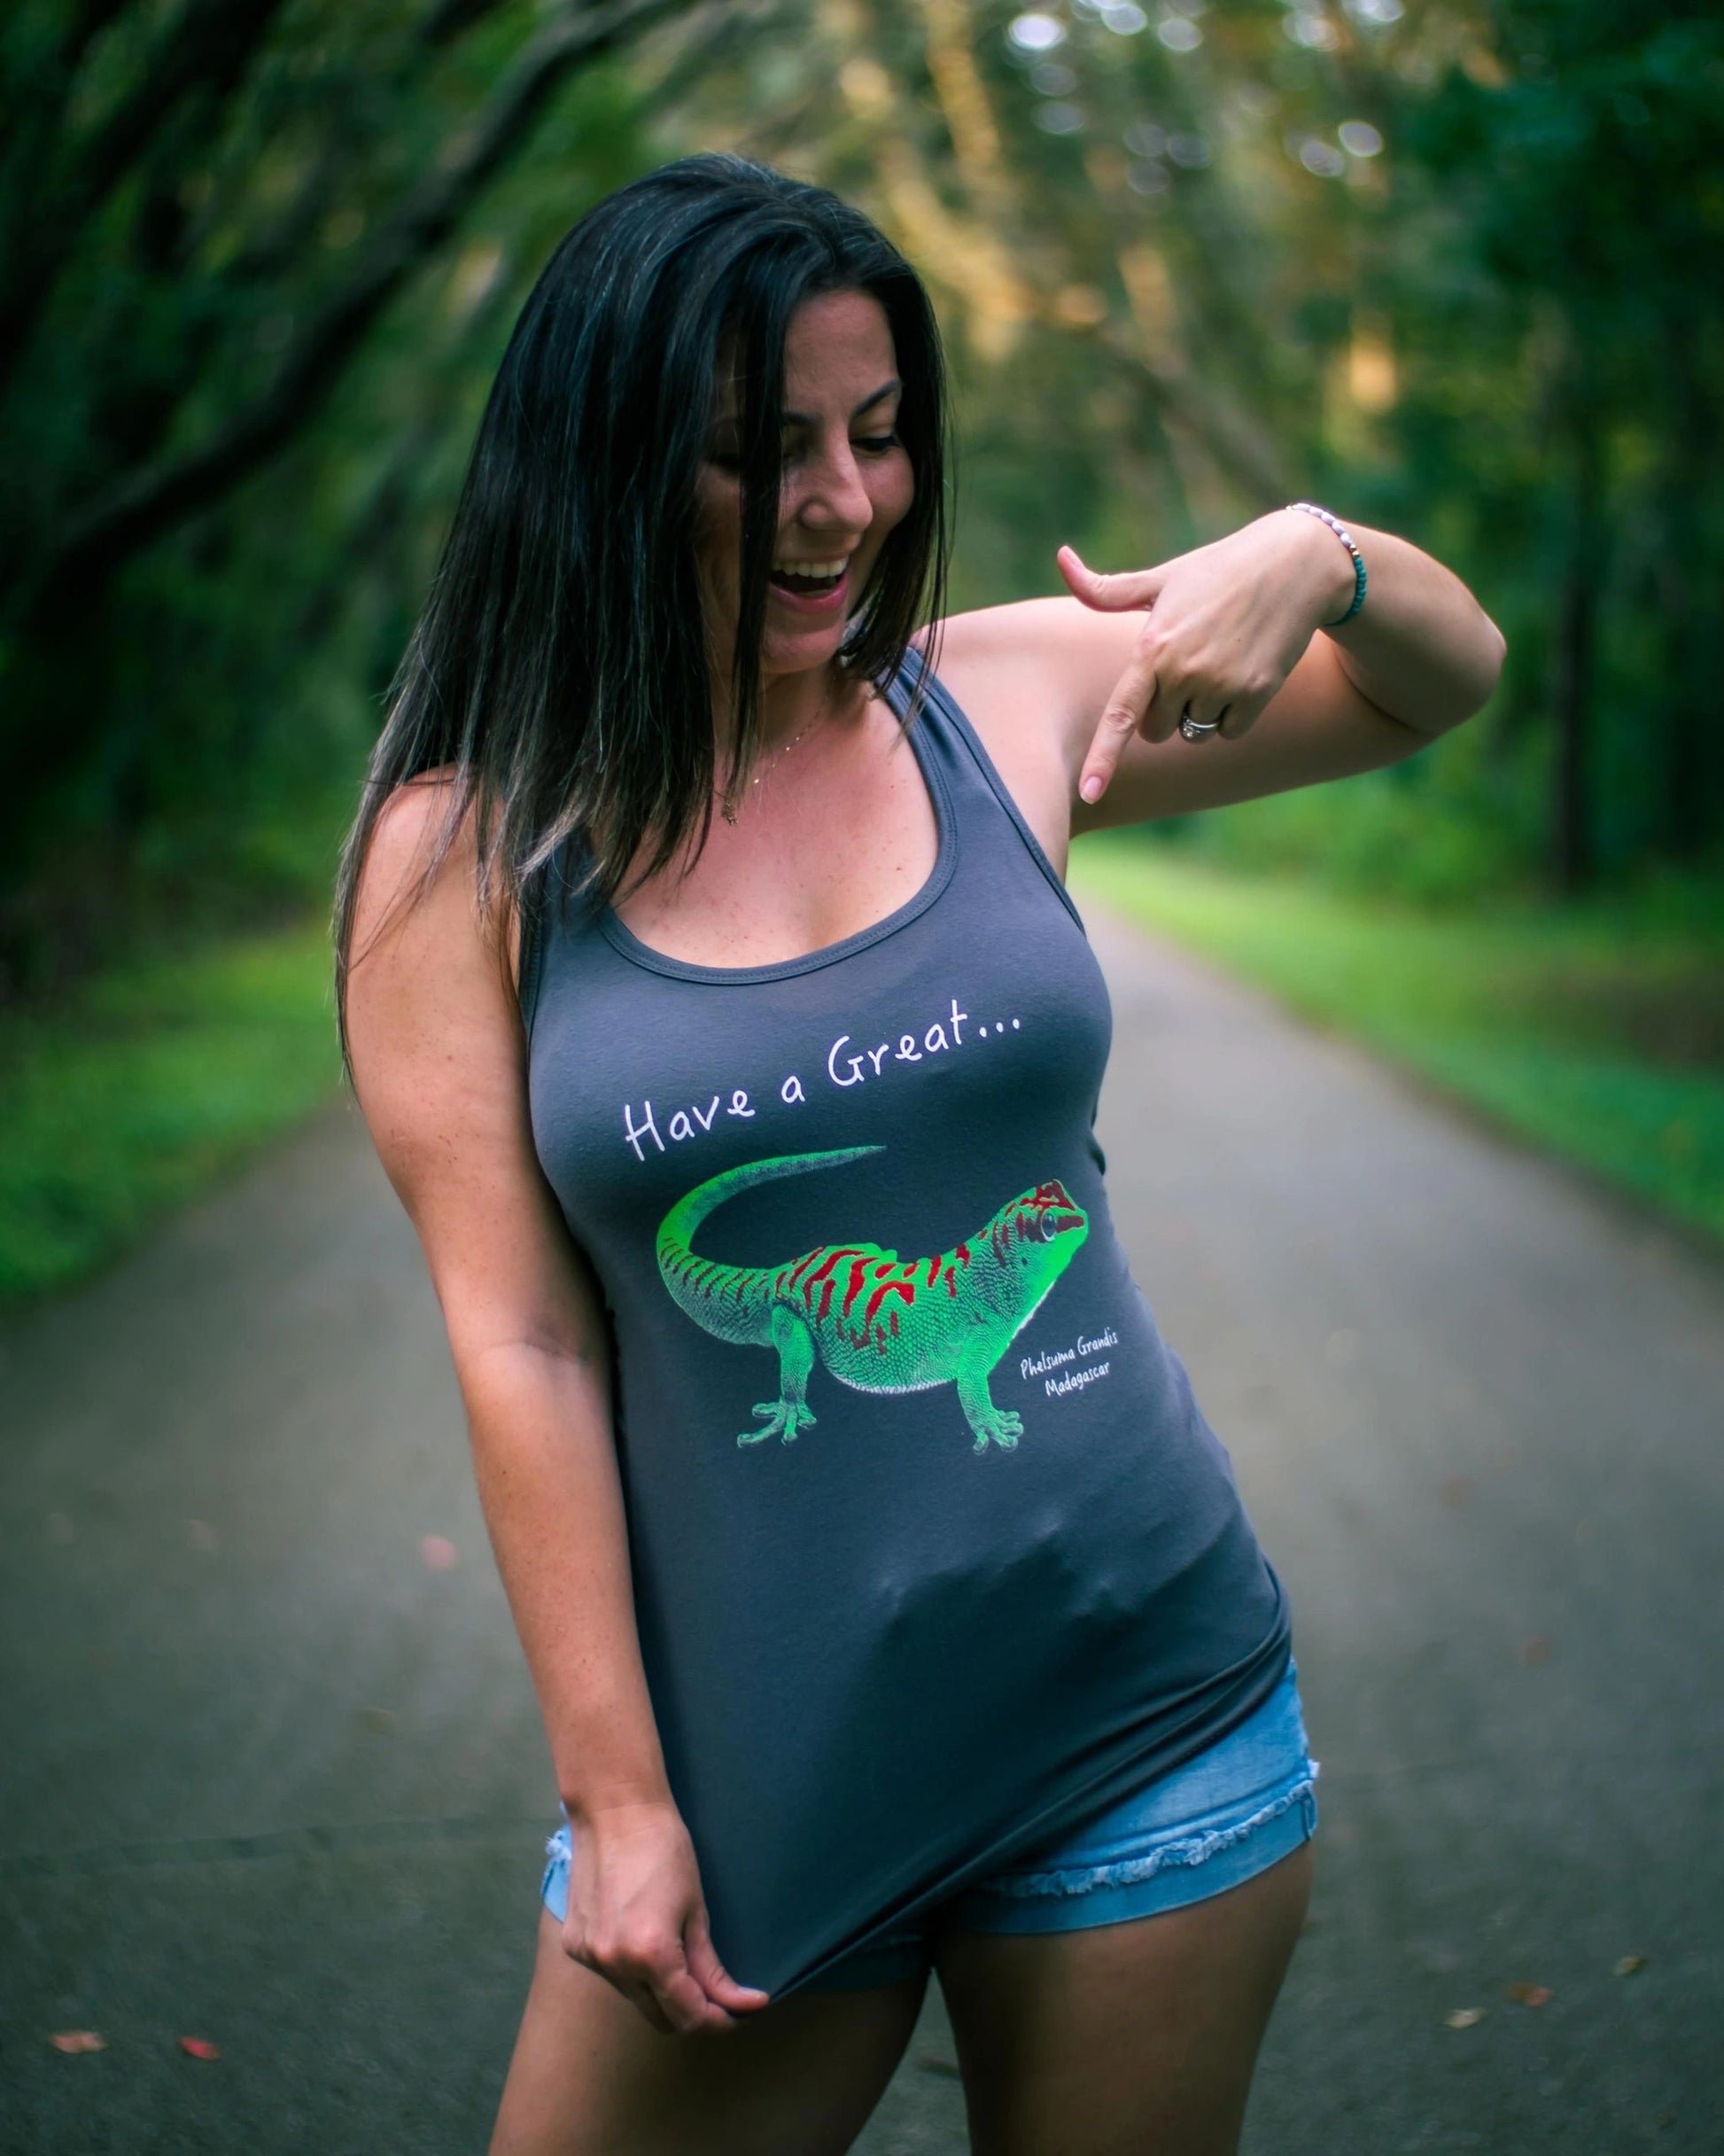 Have a Great (Day) - Ladies Racerback Tank